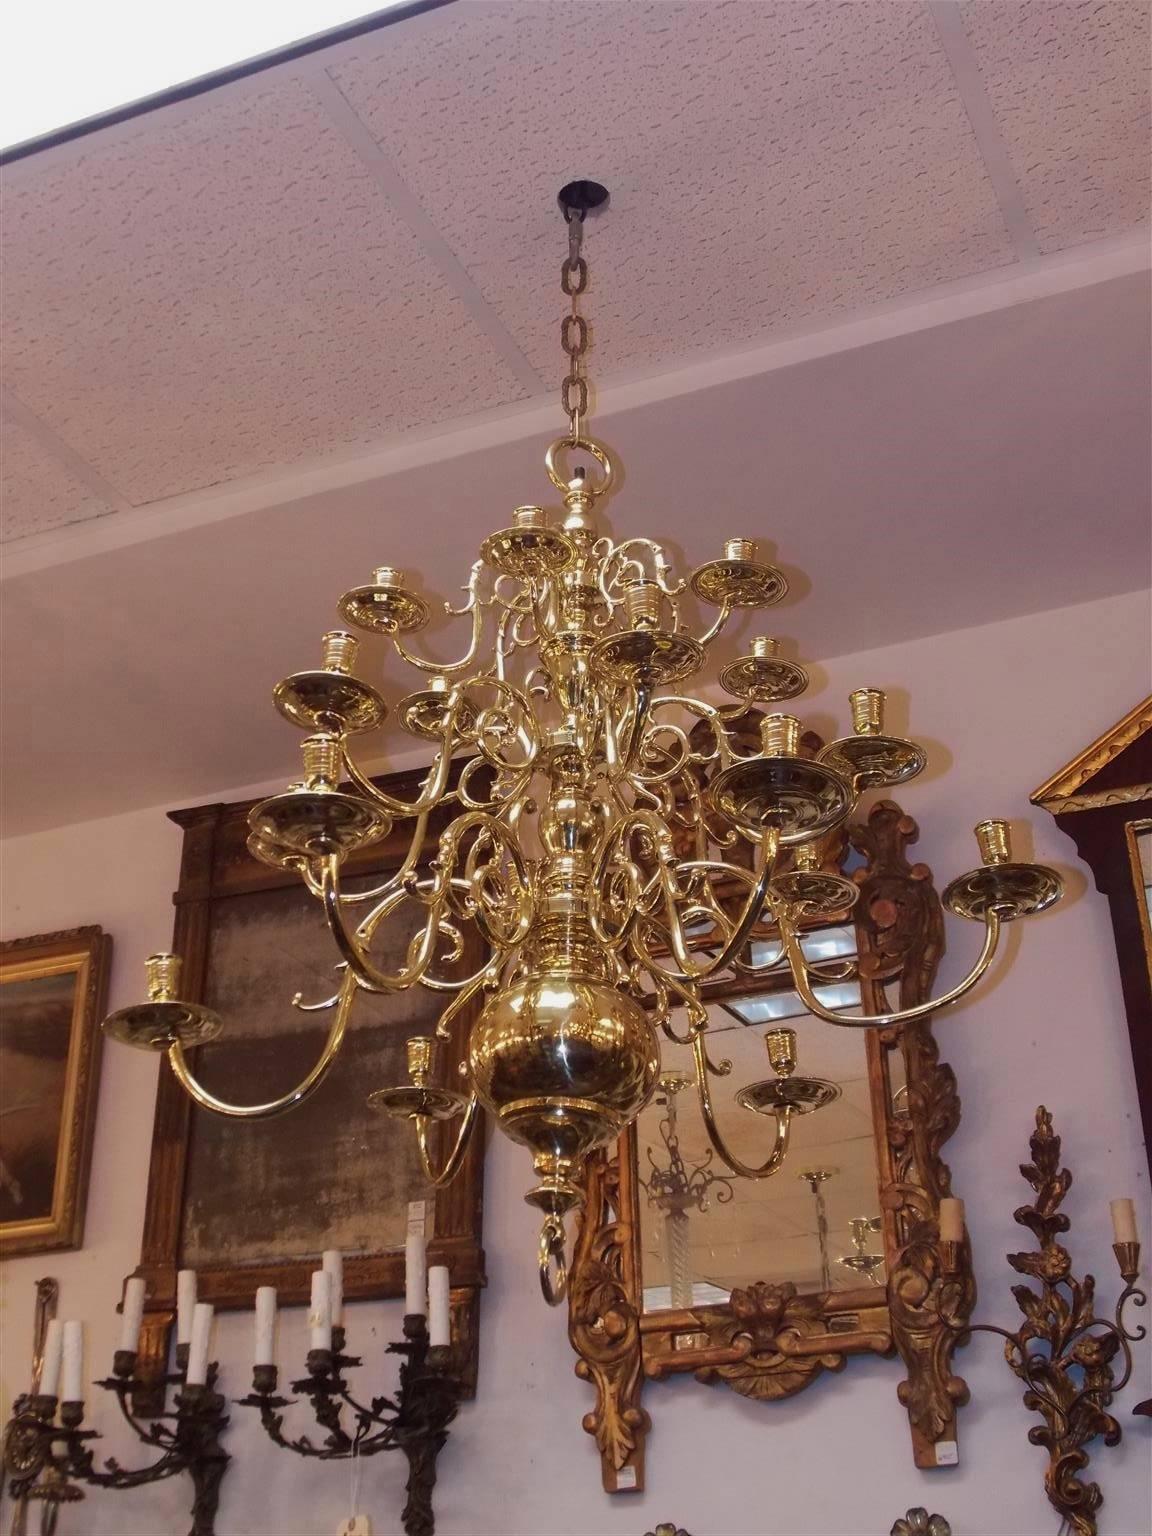 Dutch Colonial brass three-tier brass eighteen light chandelier with scrolled decorative arms, original bobeches, centered bulbous column, and terminating on a lower ball with ring finial. Candle powered and can be electrified if desired, Mid-18th